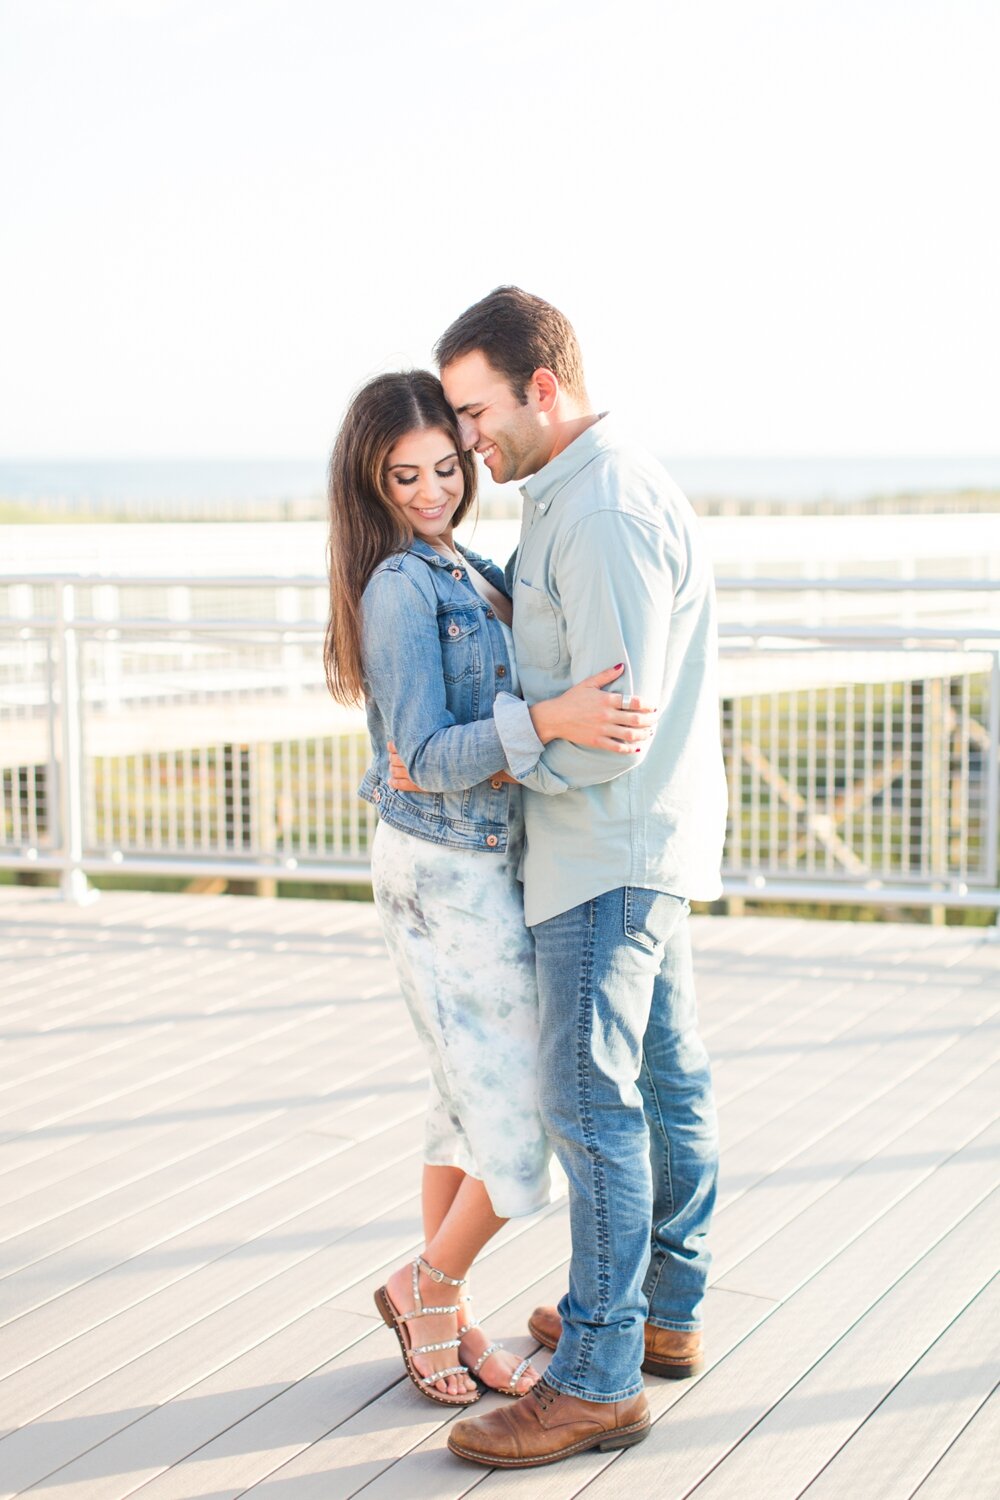 silver-sands-state-park-engagement-session-milford-connecticut-wedding-photographer-jocelyn-chris-shaina-lee-photography-photo